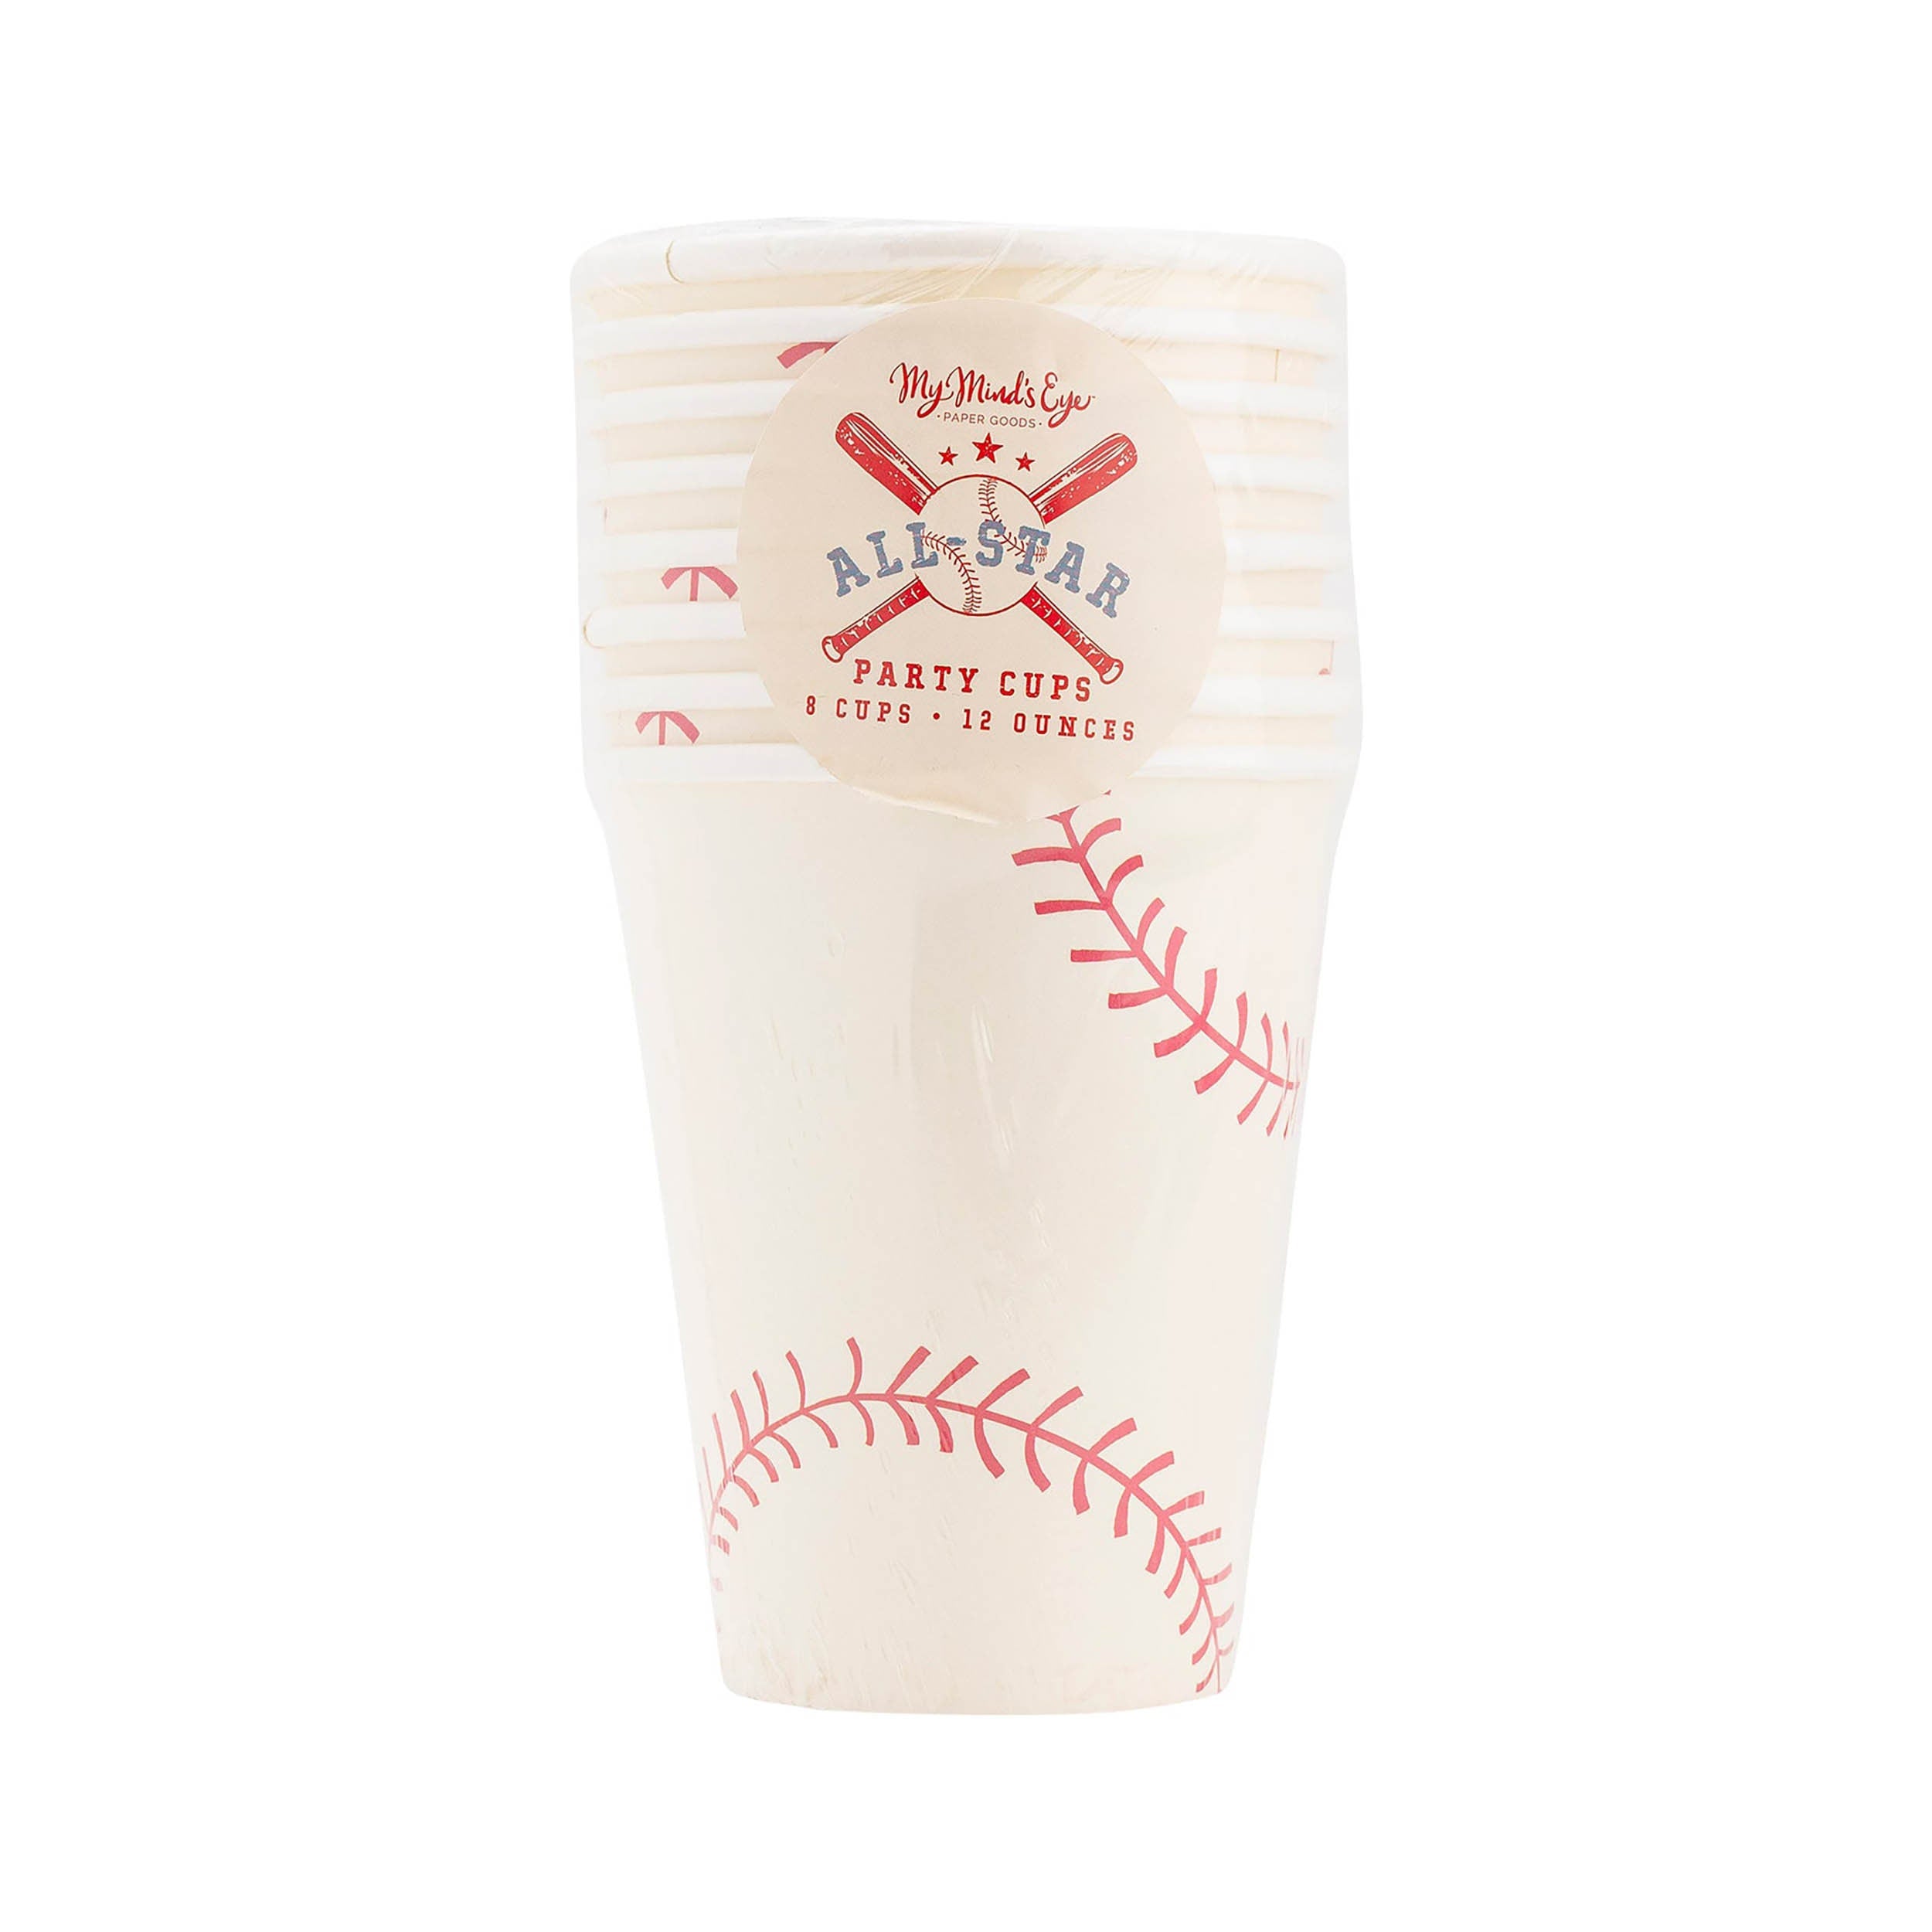 Set of 8 paper cups for a Baseball Birthday Party - Holds 12 ounces